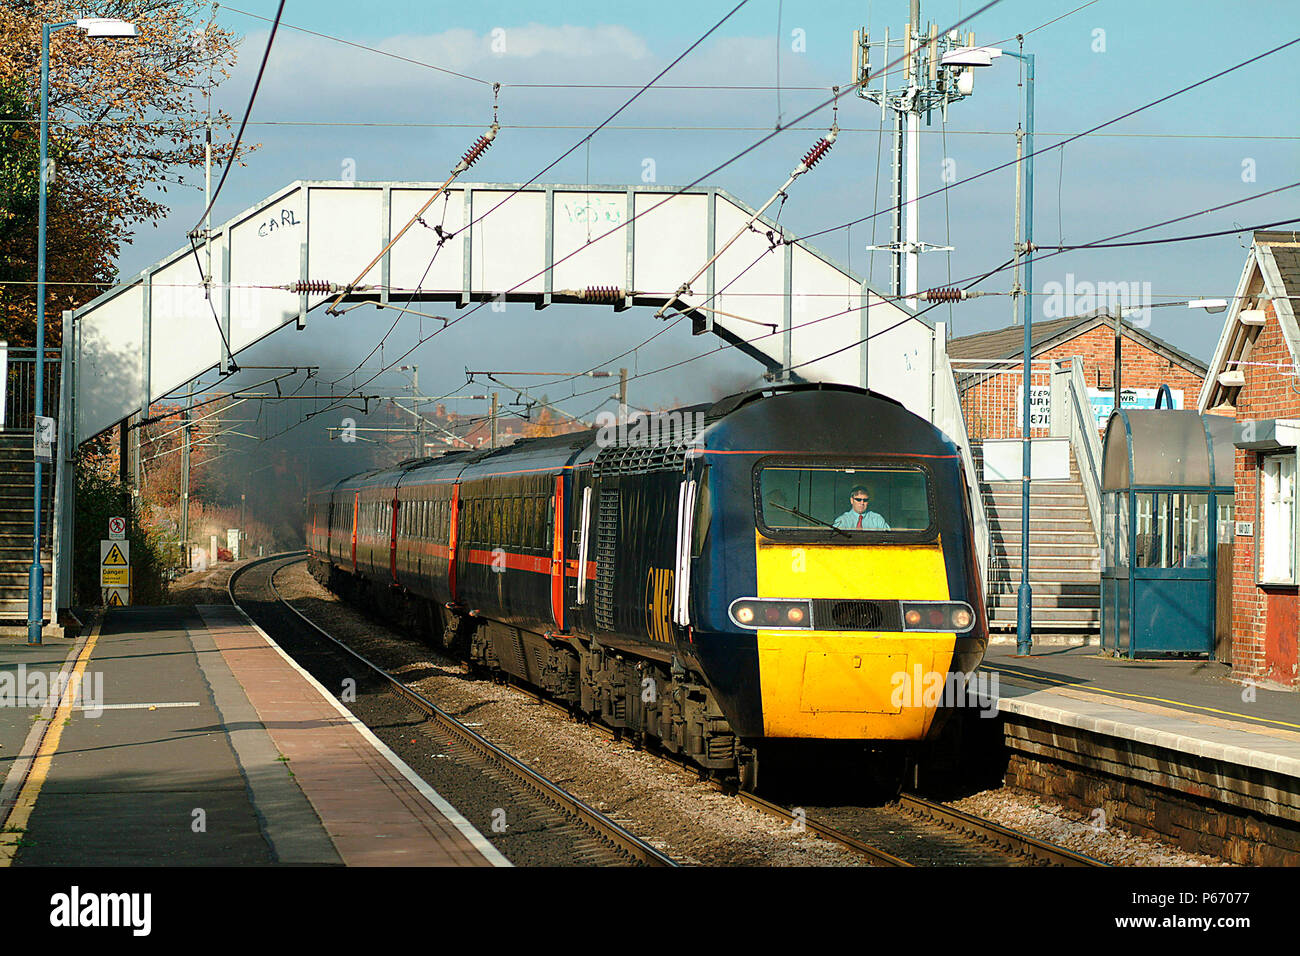 Still providing reliable service, the HST sets of GNER continue to provide high speed services from London to Aberdeen and Inverness such as this Aber Stock Photo